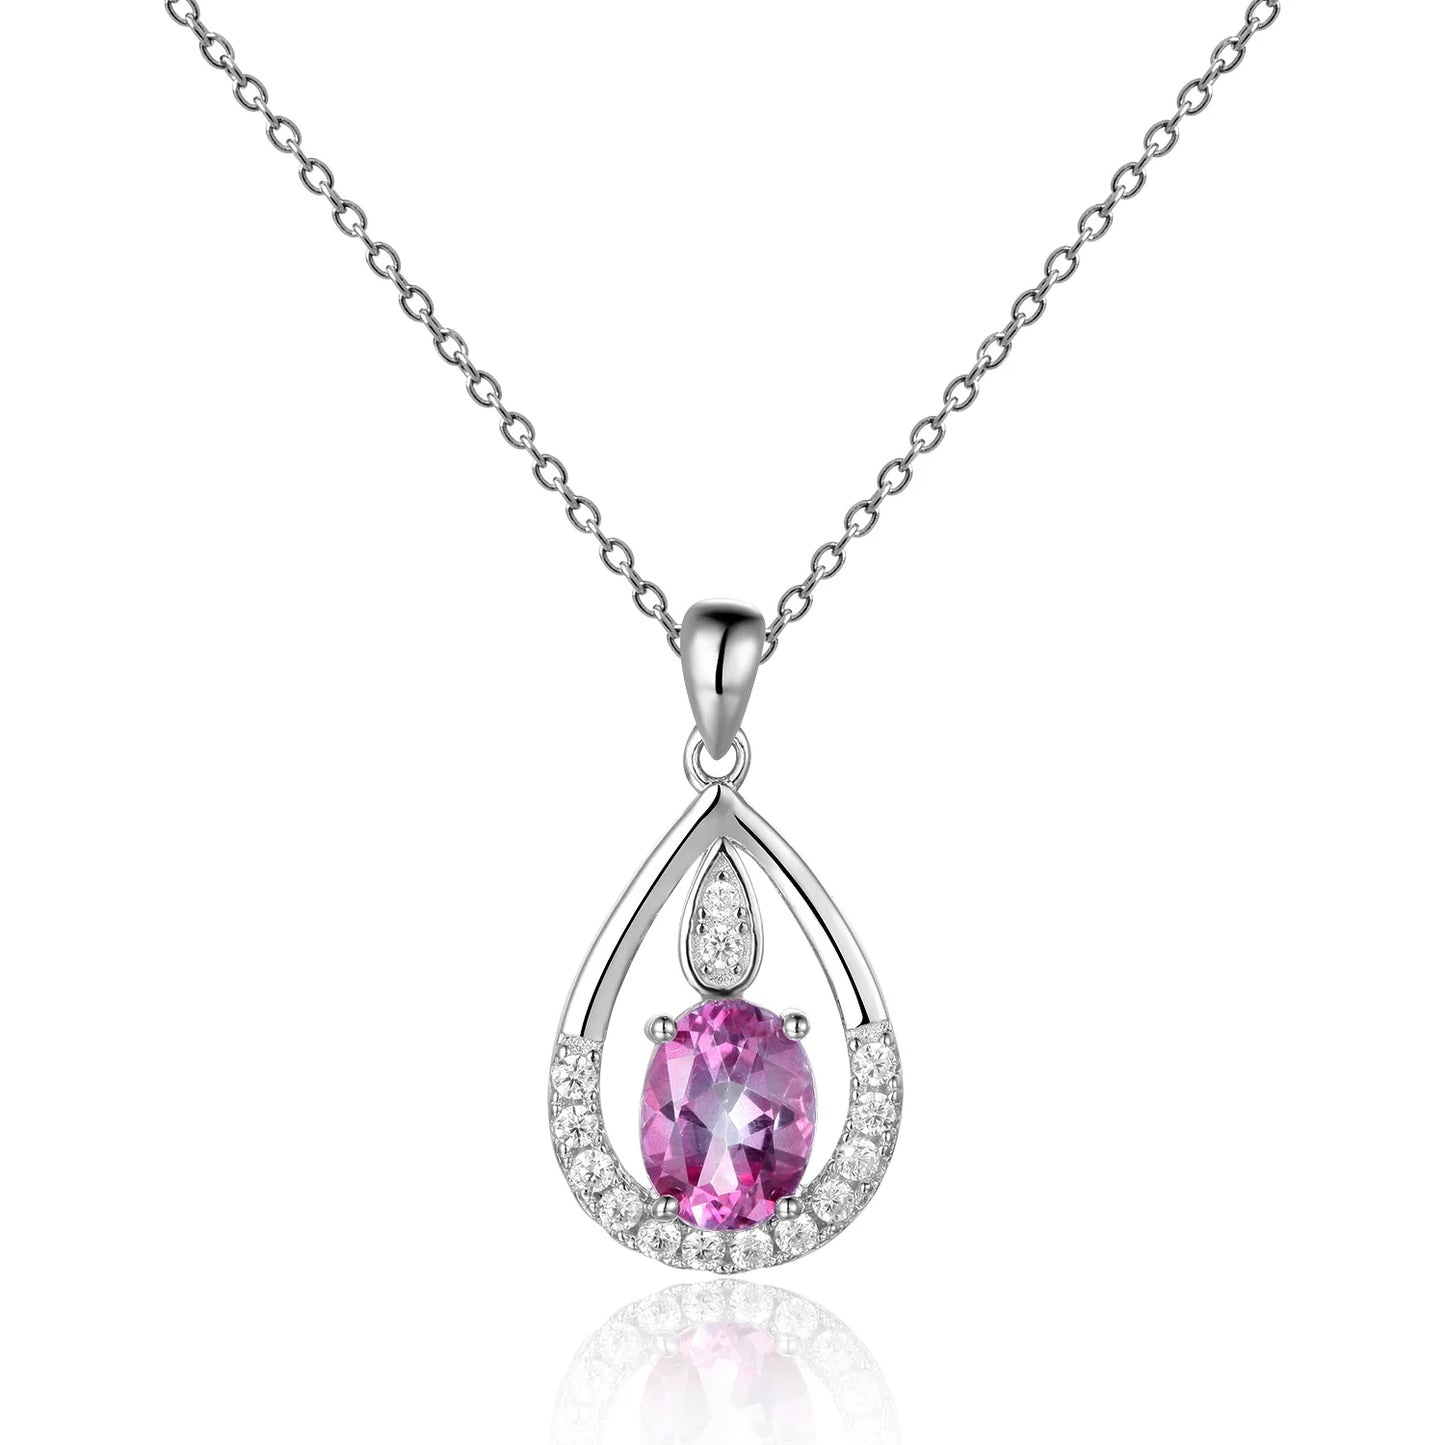 Gem's Ballet December Birthstone Topaz Necklace 6x8mm Oval Pink Topaz Pendant Necklace in 925 Sterling Silver with 18" Chain Pink Topaz